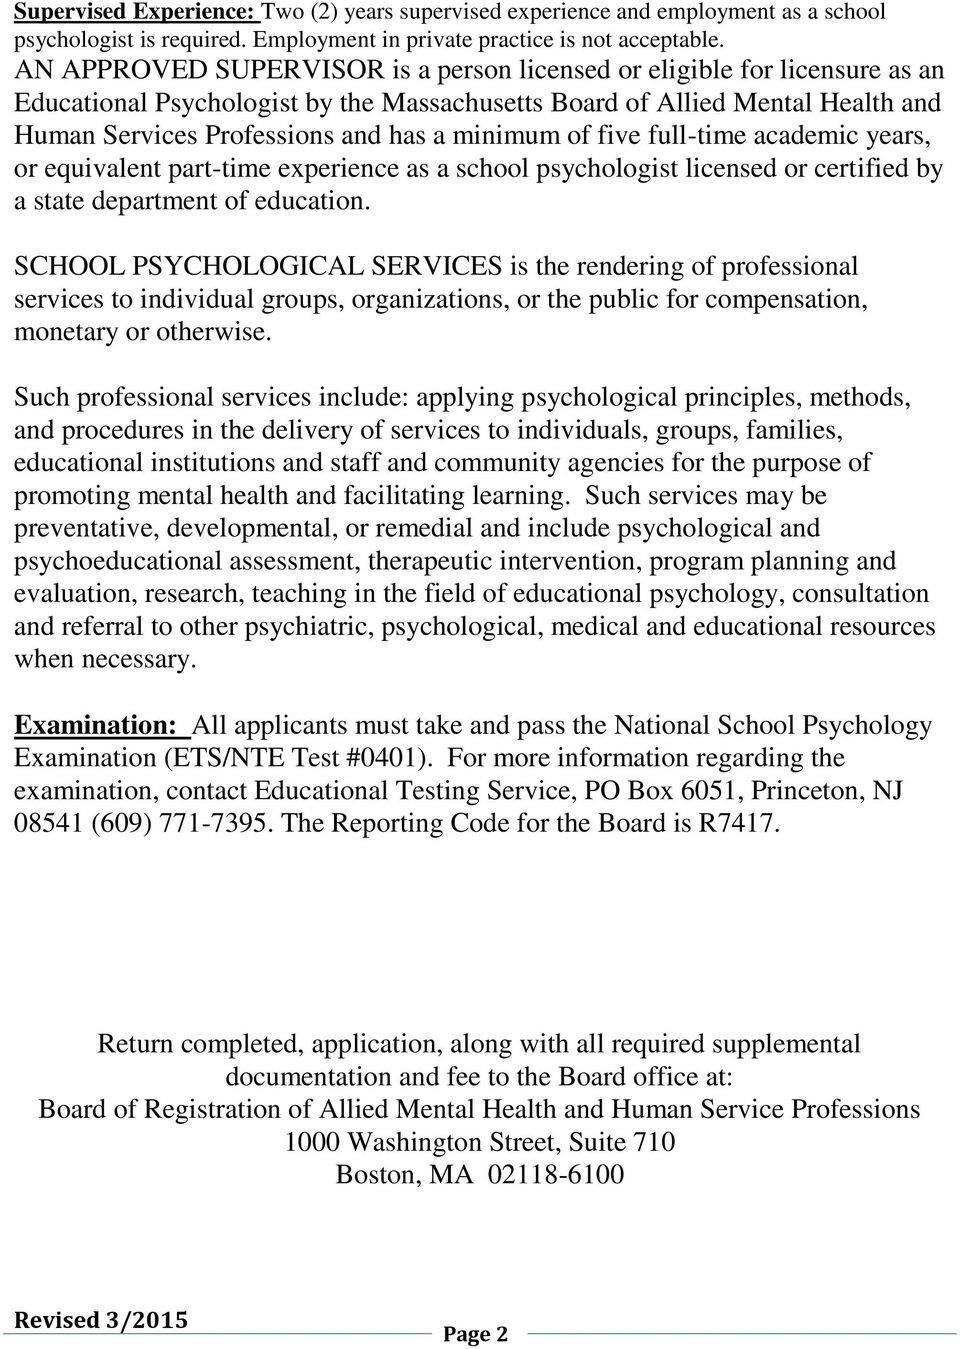 minimum of five full-time academic years, or equivalent part-time experience as a school psychologist licensed or certified by a state department of education.